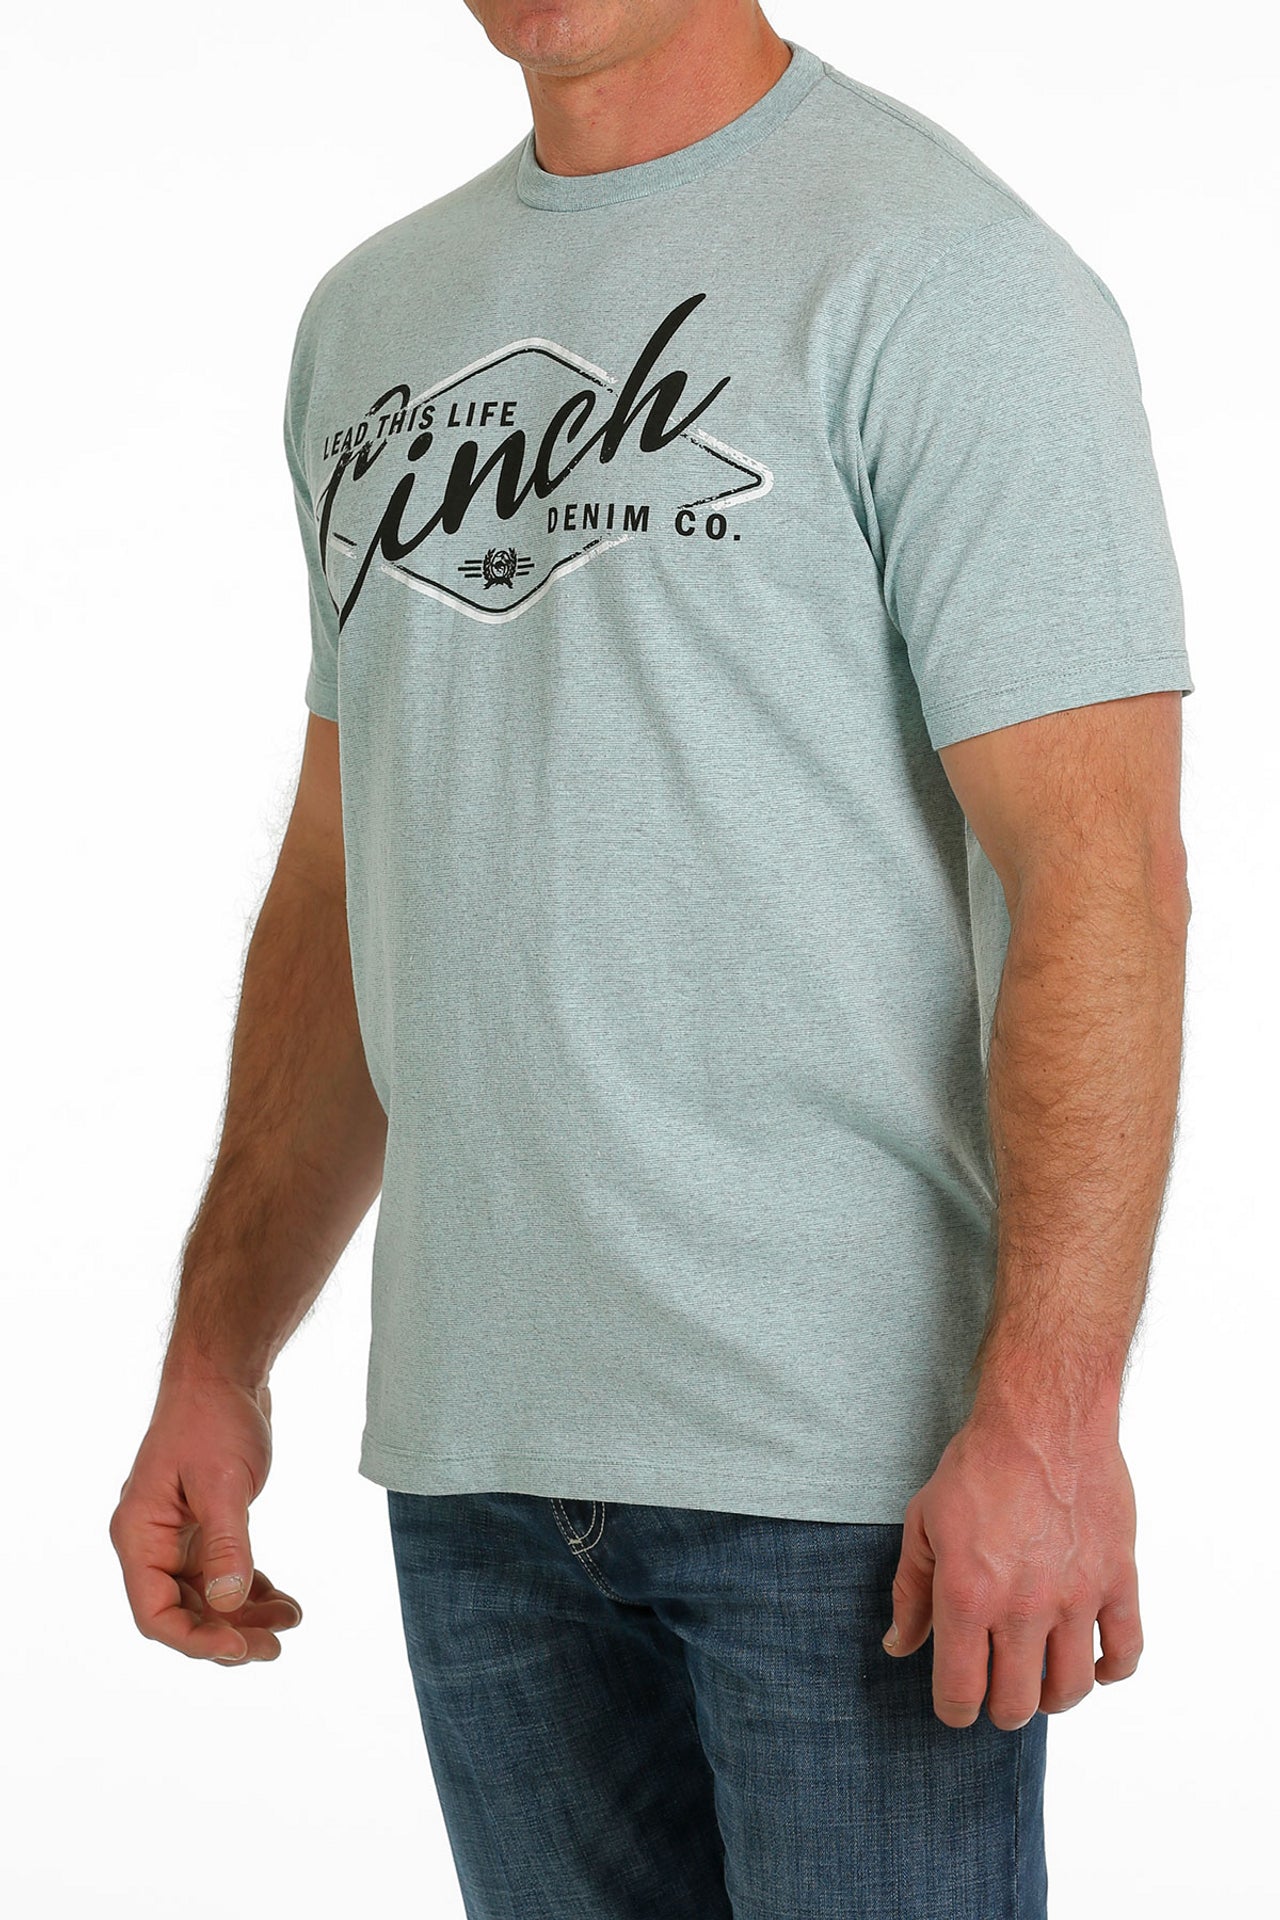 Cinch Denim Co. "Lead This Life" Graphic T-Shirt - Heather Teal